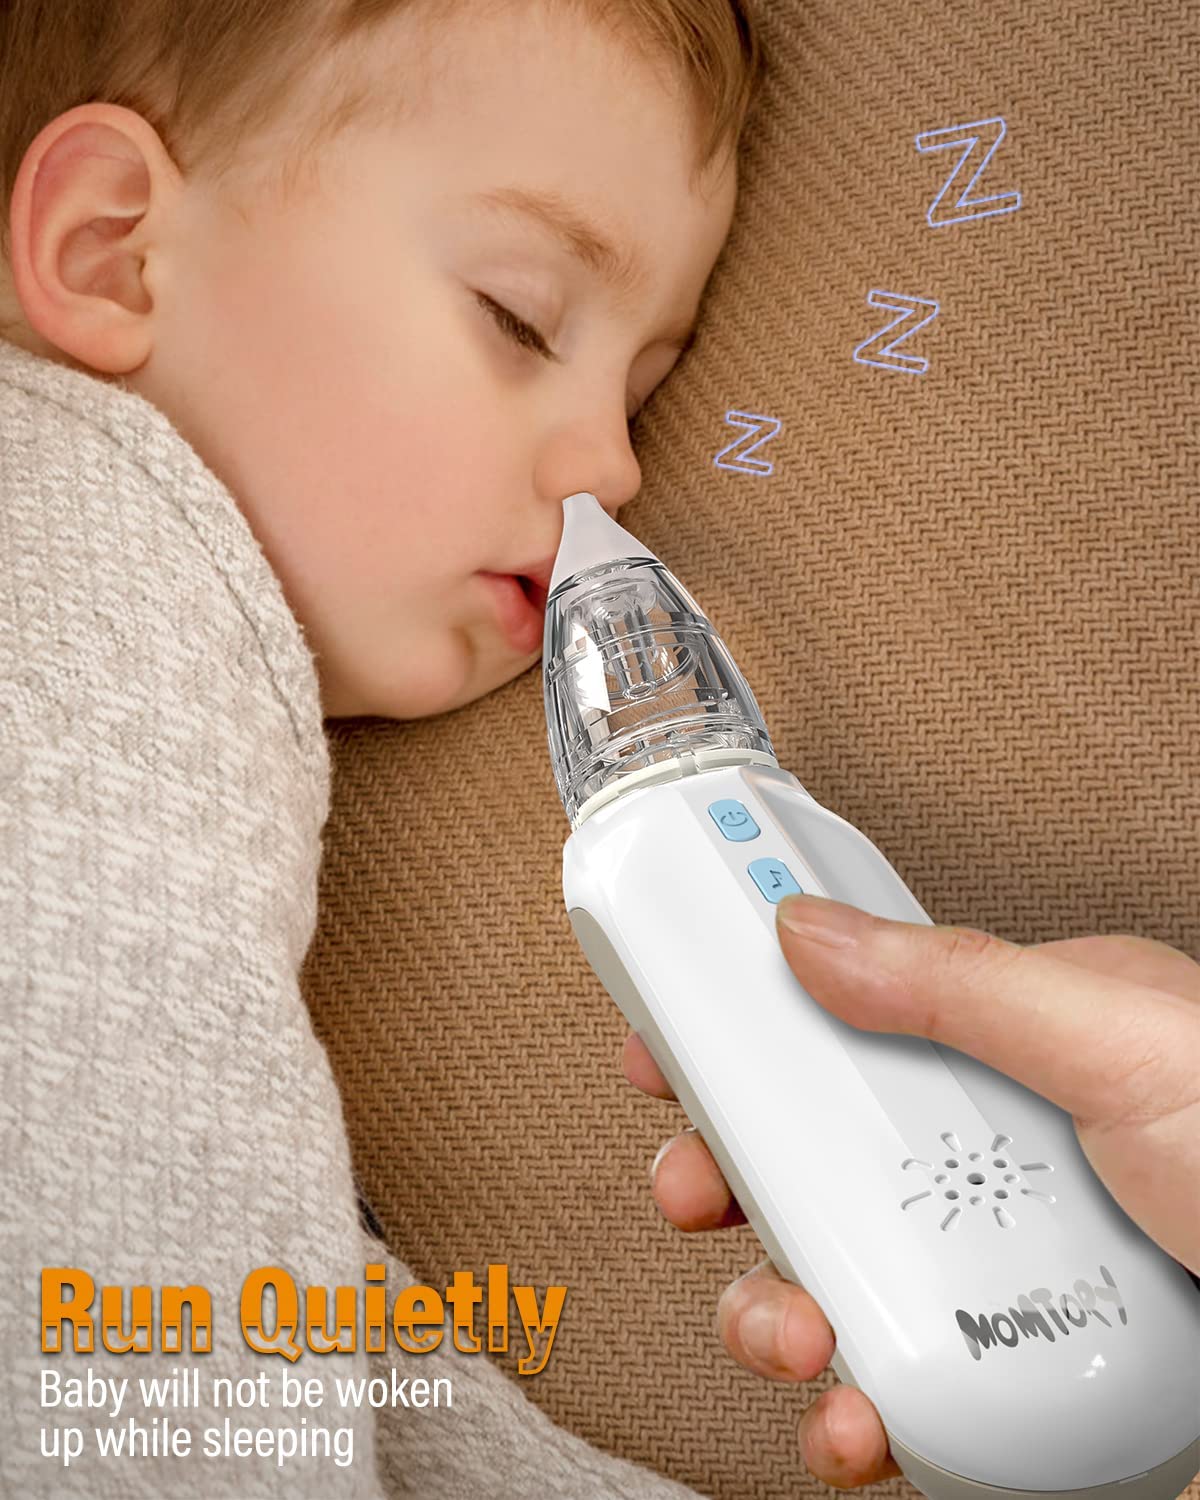 Electric Nasal Aspirator for Baby, MOMTORY Baby Nose Sucker, Baby